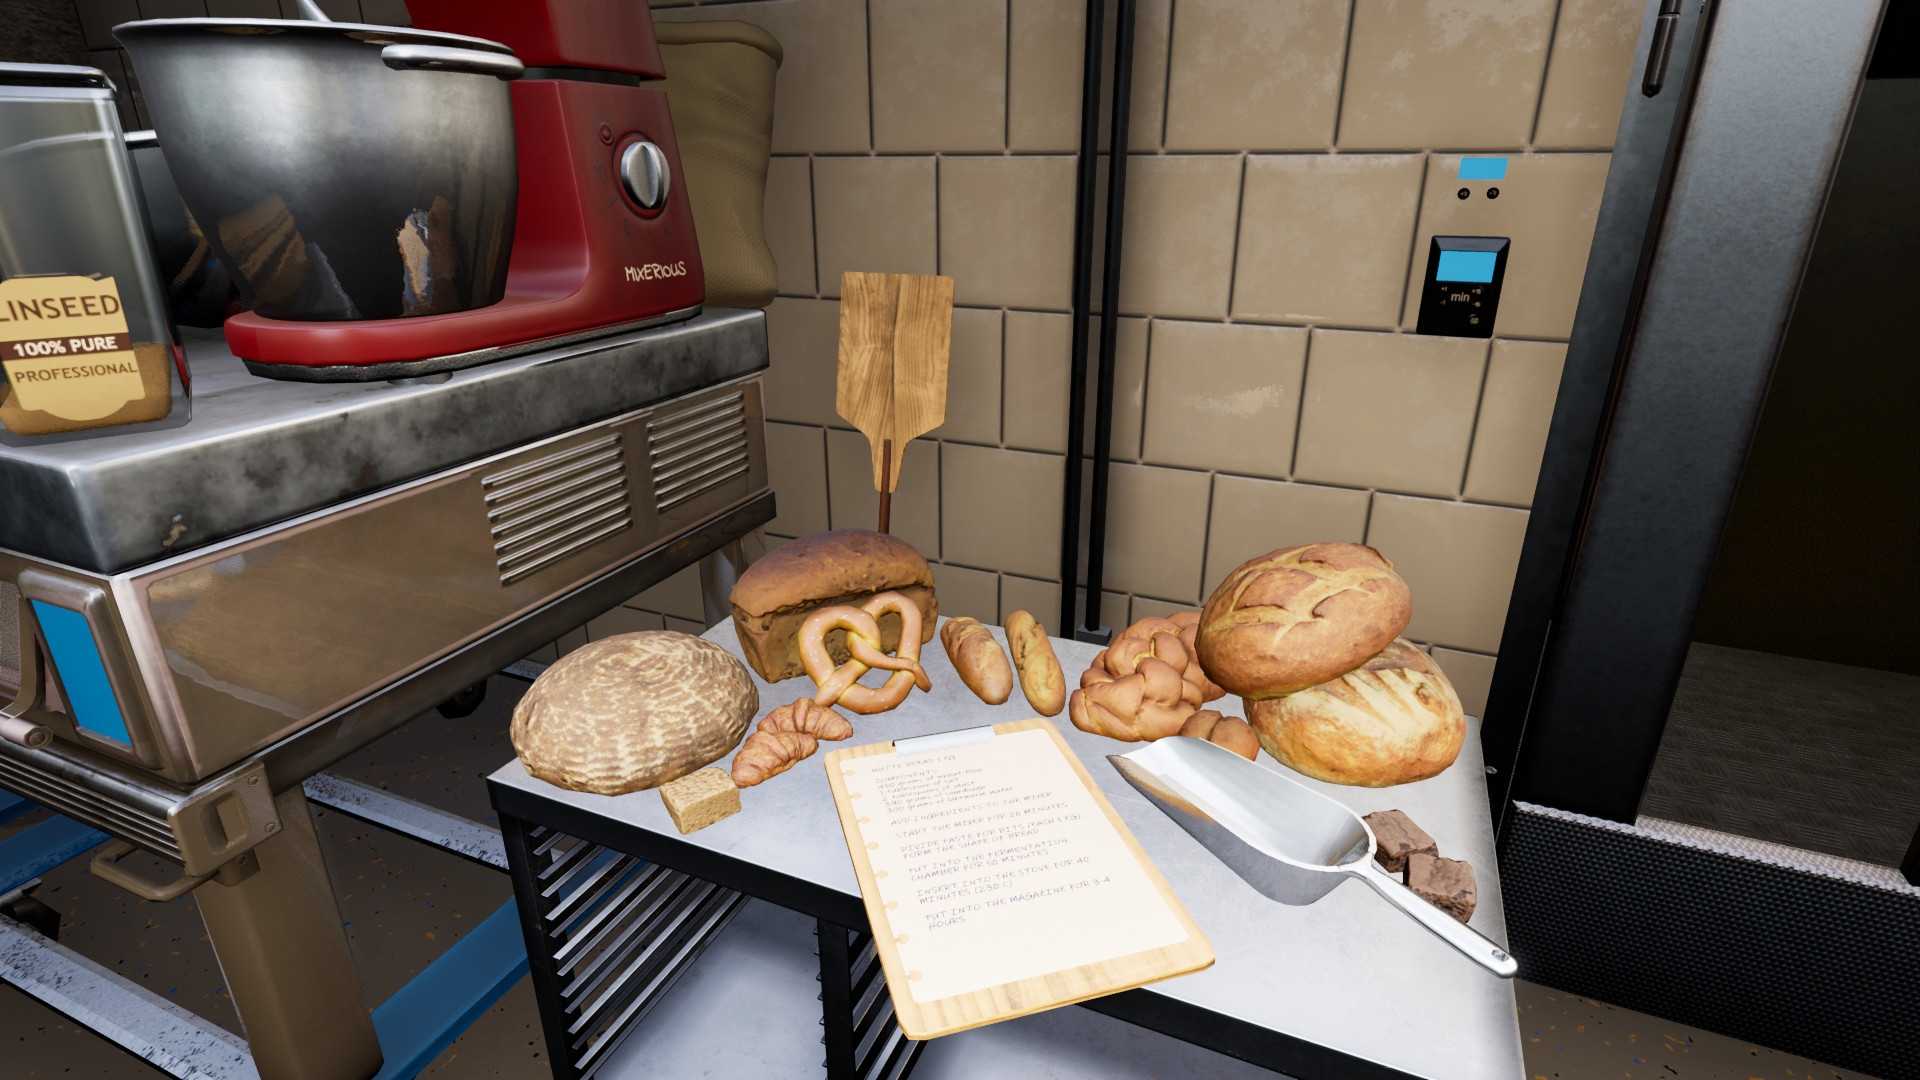 Build A Thriving Bakery And Bake Sweet Treats In Live Motion Games’s Bakery Simulator